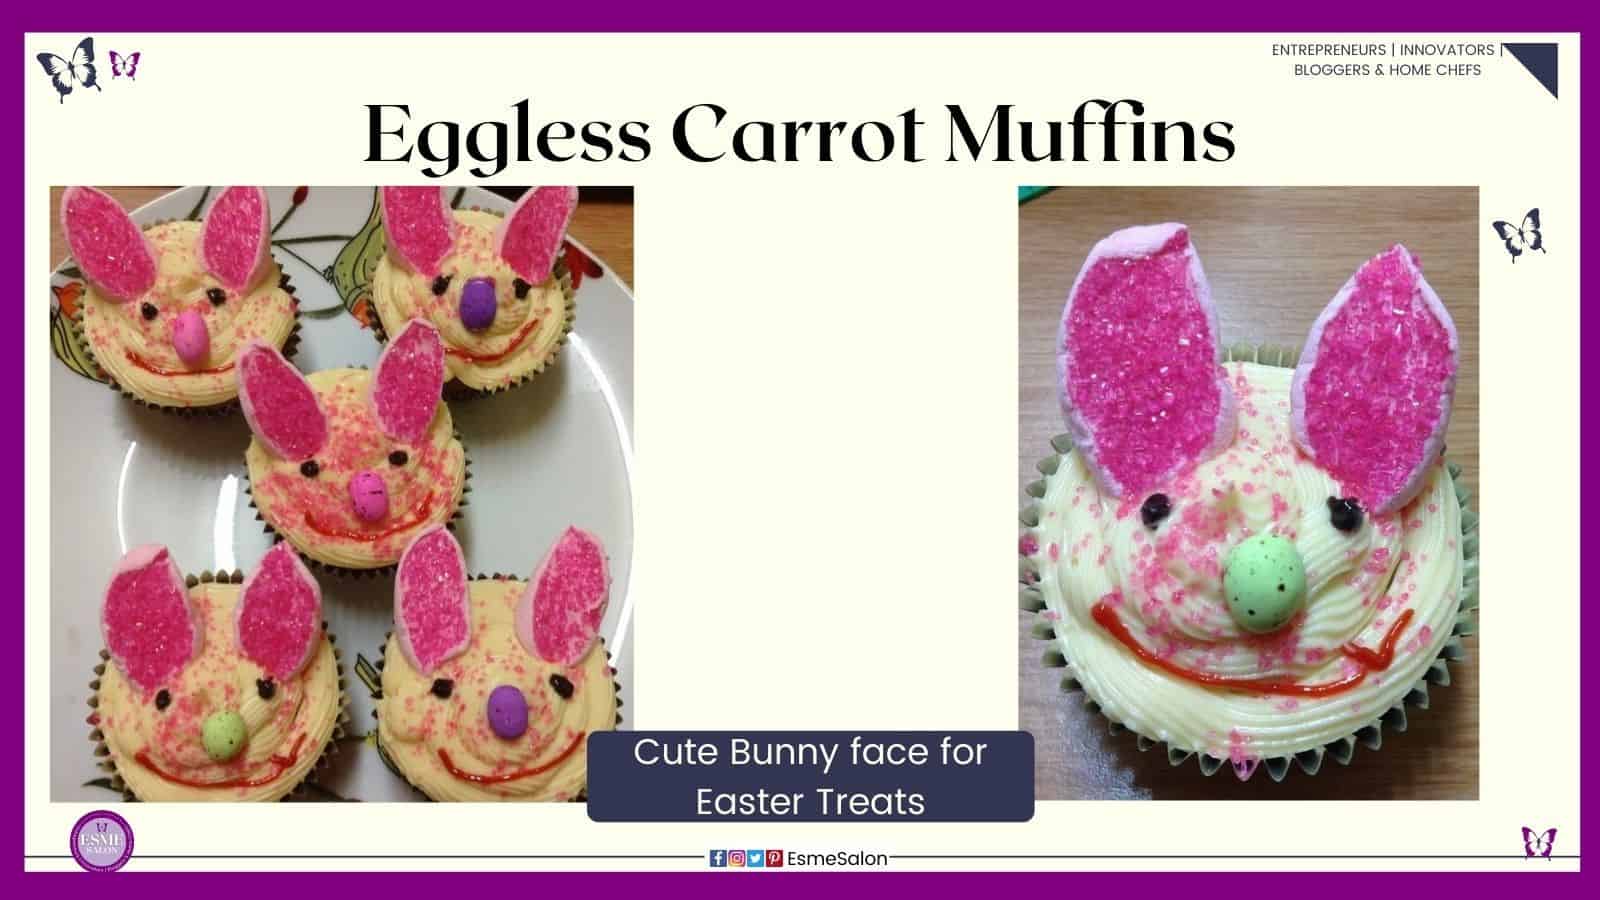 an image of a Eggless Carrot Muffin decorated with pink marshmallow to look like ears and a speckled egg for a bunny face